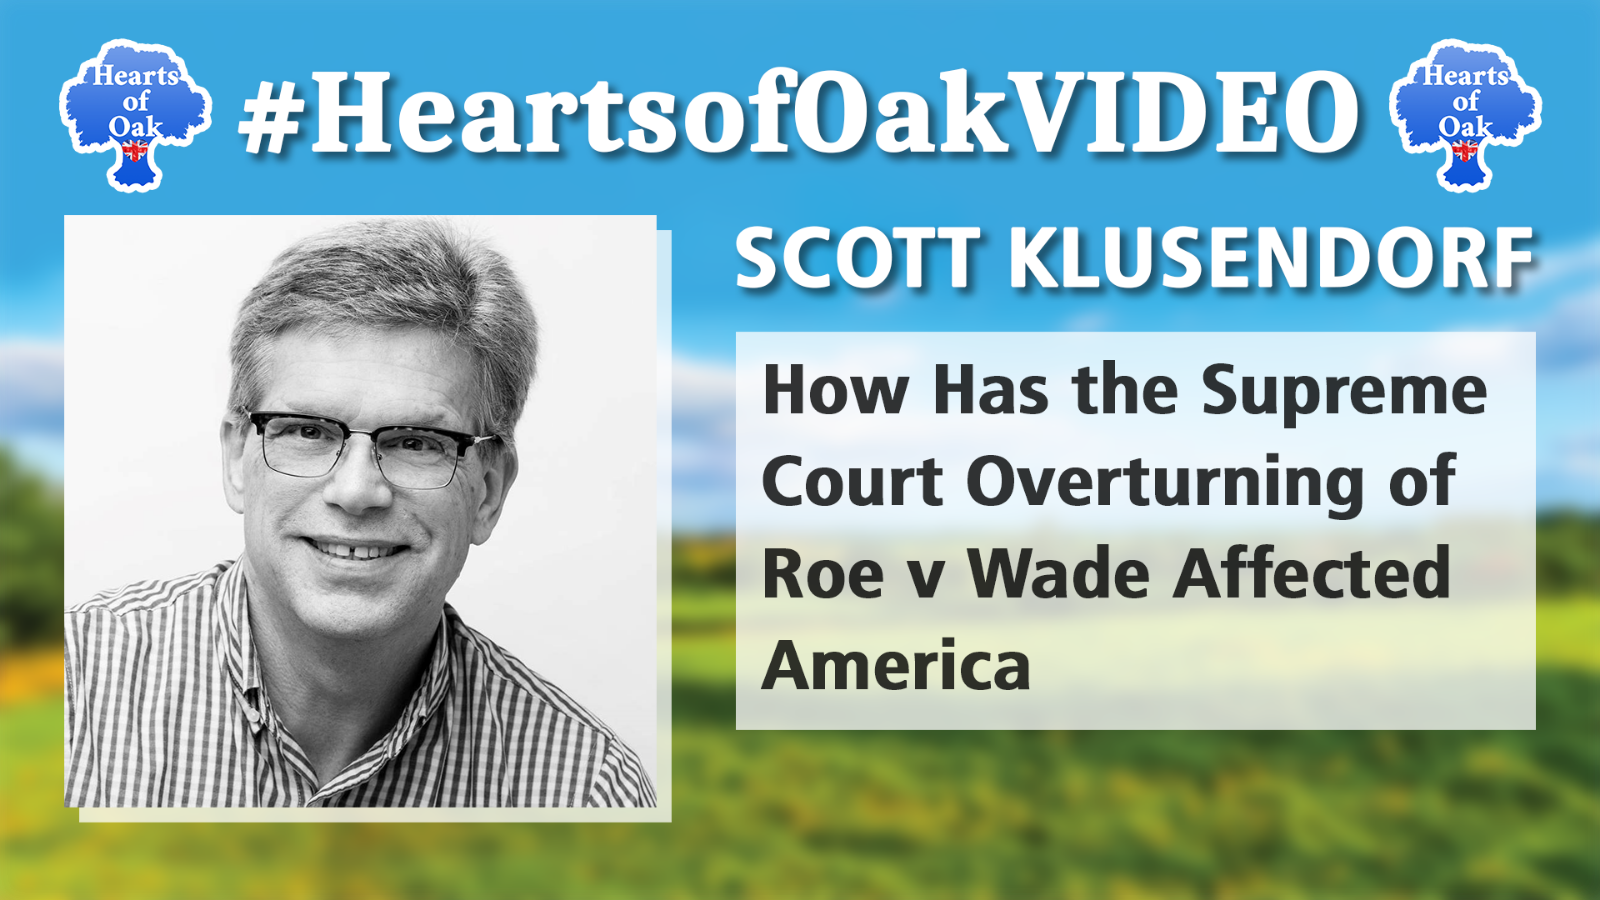 Scott Klusendorf - How Has the Supreme Court Overturning of Roe v Wade Affected America